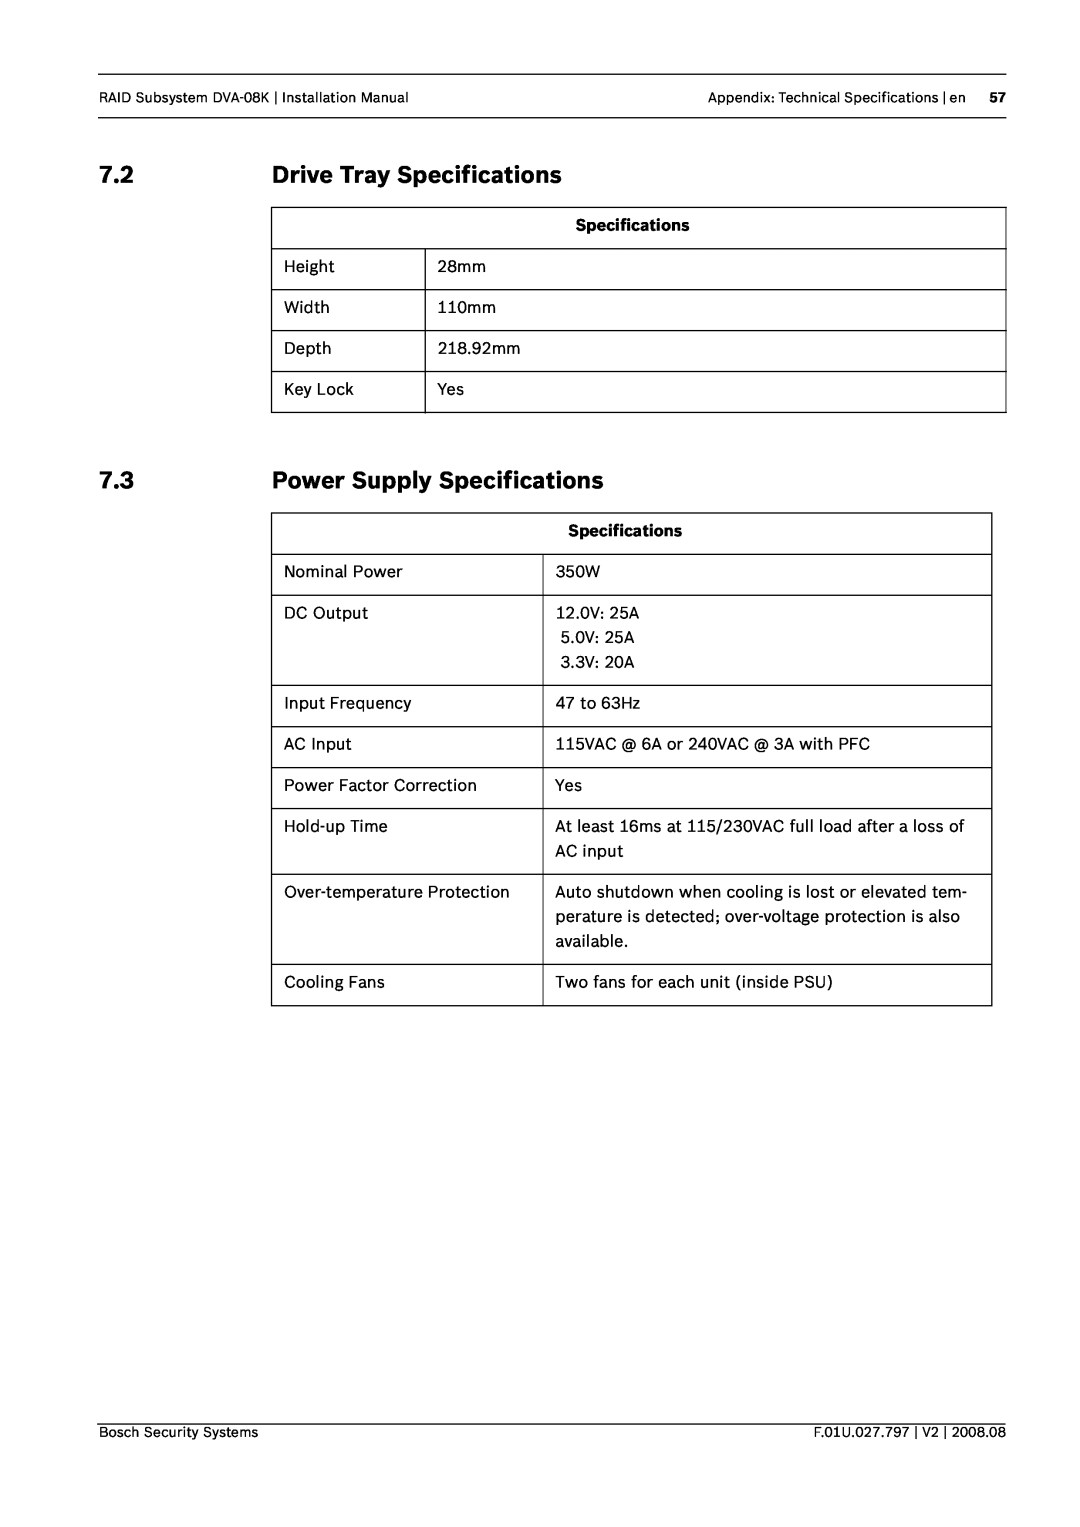 Bosch Appliances DVA-08K manual Drive Tray Specifications, Power Supply Specifications 